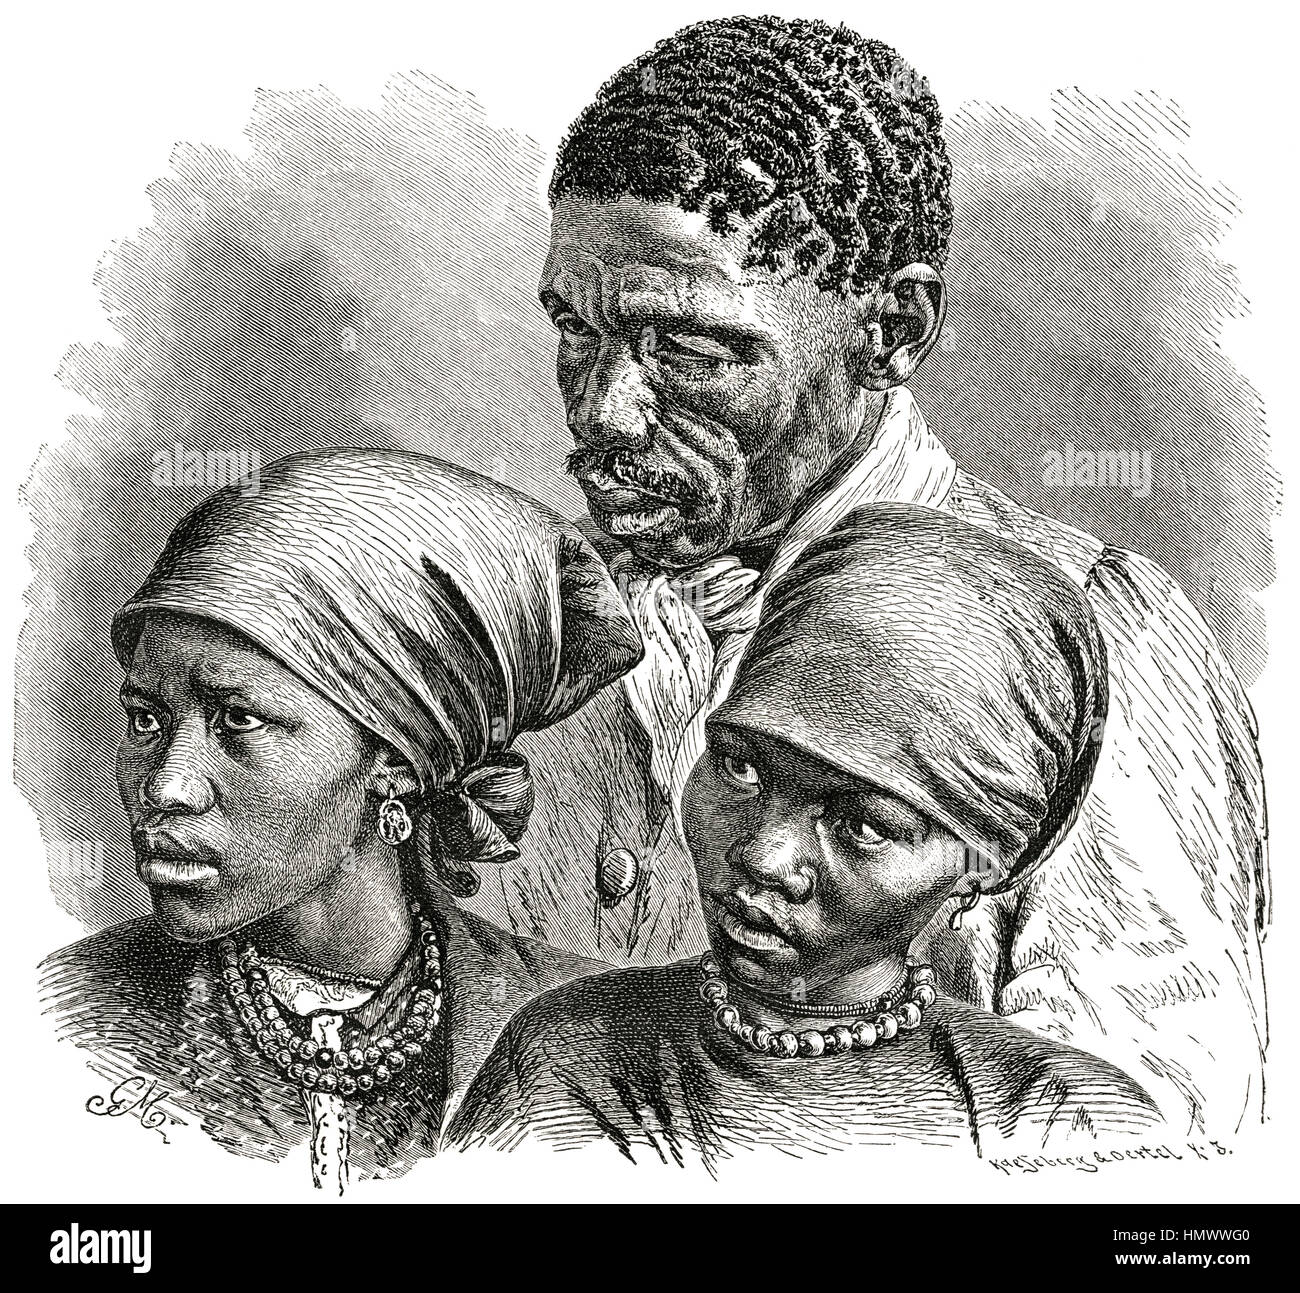 Namaquan Man and Two Women, Berseba, Namibia, Africa, Illustration from the book, 'Volkerkunde' by Dr. Fredrich Ratzel, Bibliographisches Institut, Leipzig, 1885 Stock Photo